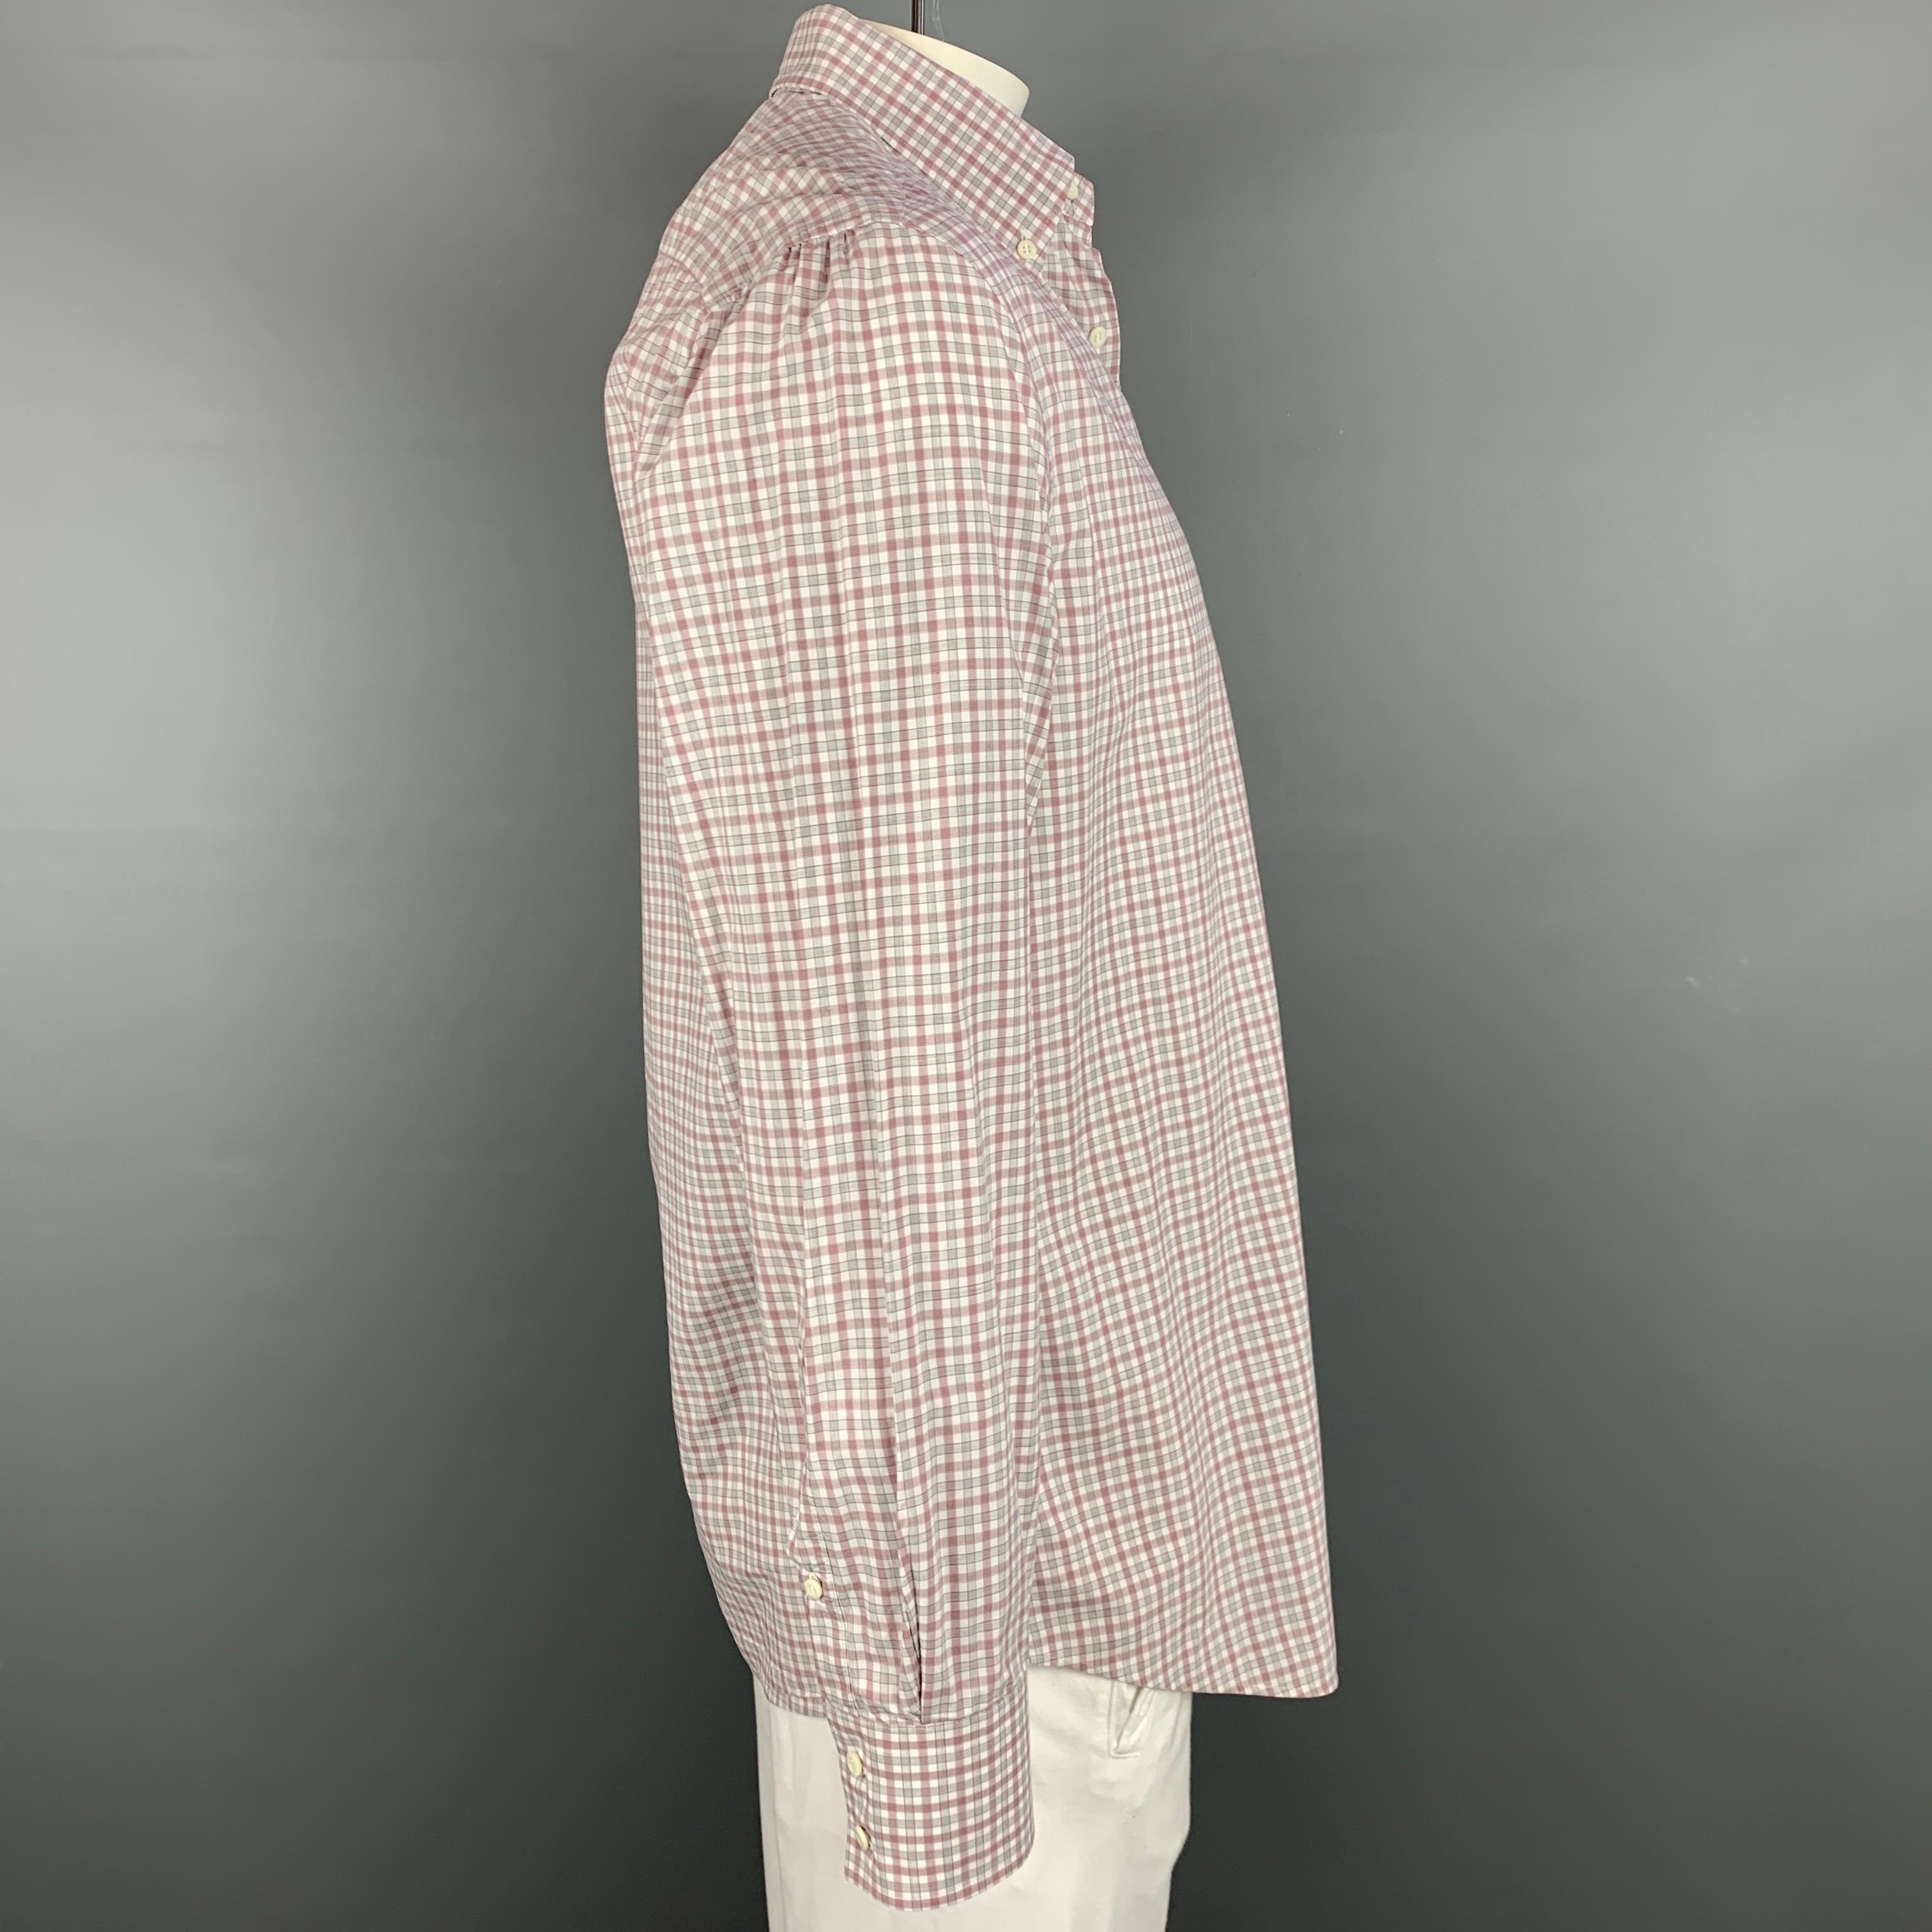 BRUNELLO CUCINELLI long sleeve shirt comes in a white & grey plaid cotton featuring a basic fit, front pocket , and a button down style. Made in Italy.

Very Good Pre-Owned Condition.
Marked: XXL

Measurements:

Shoulder: 20 in.
Chest: 47